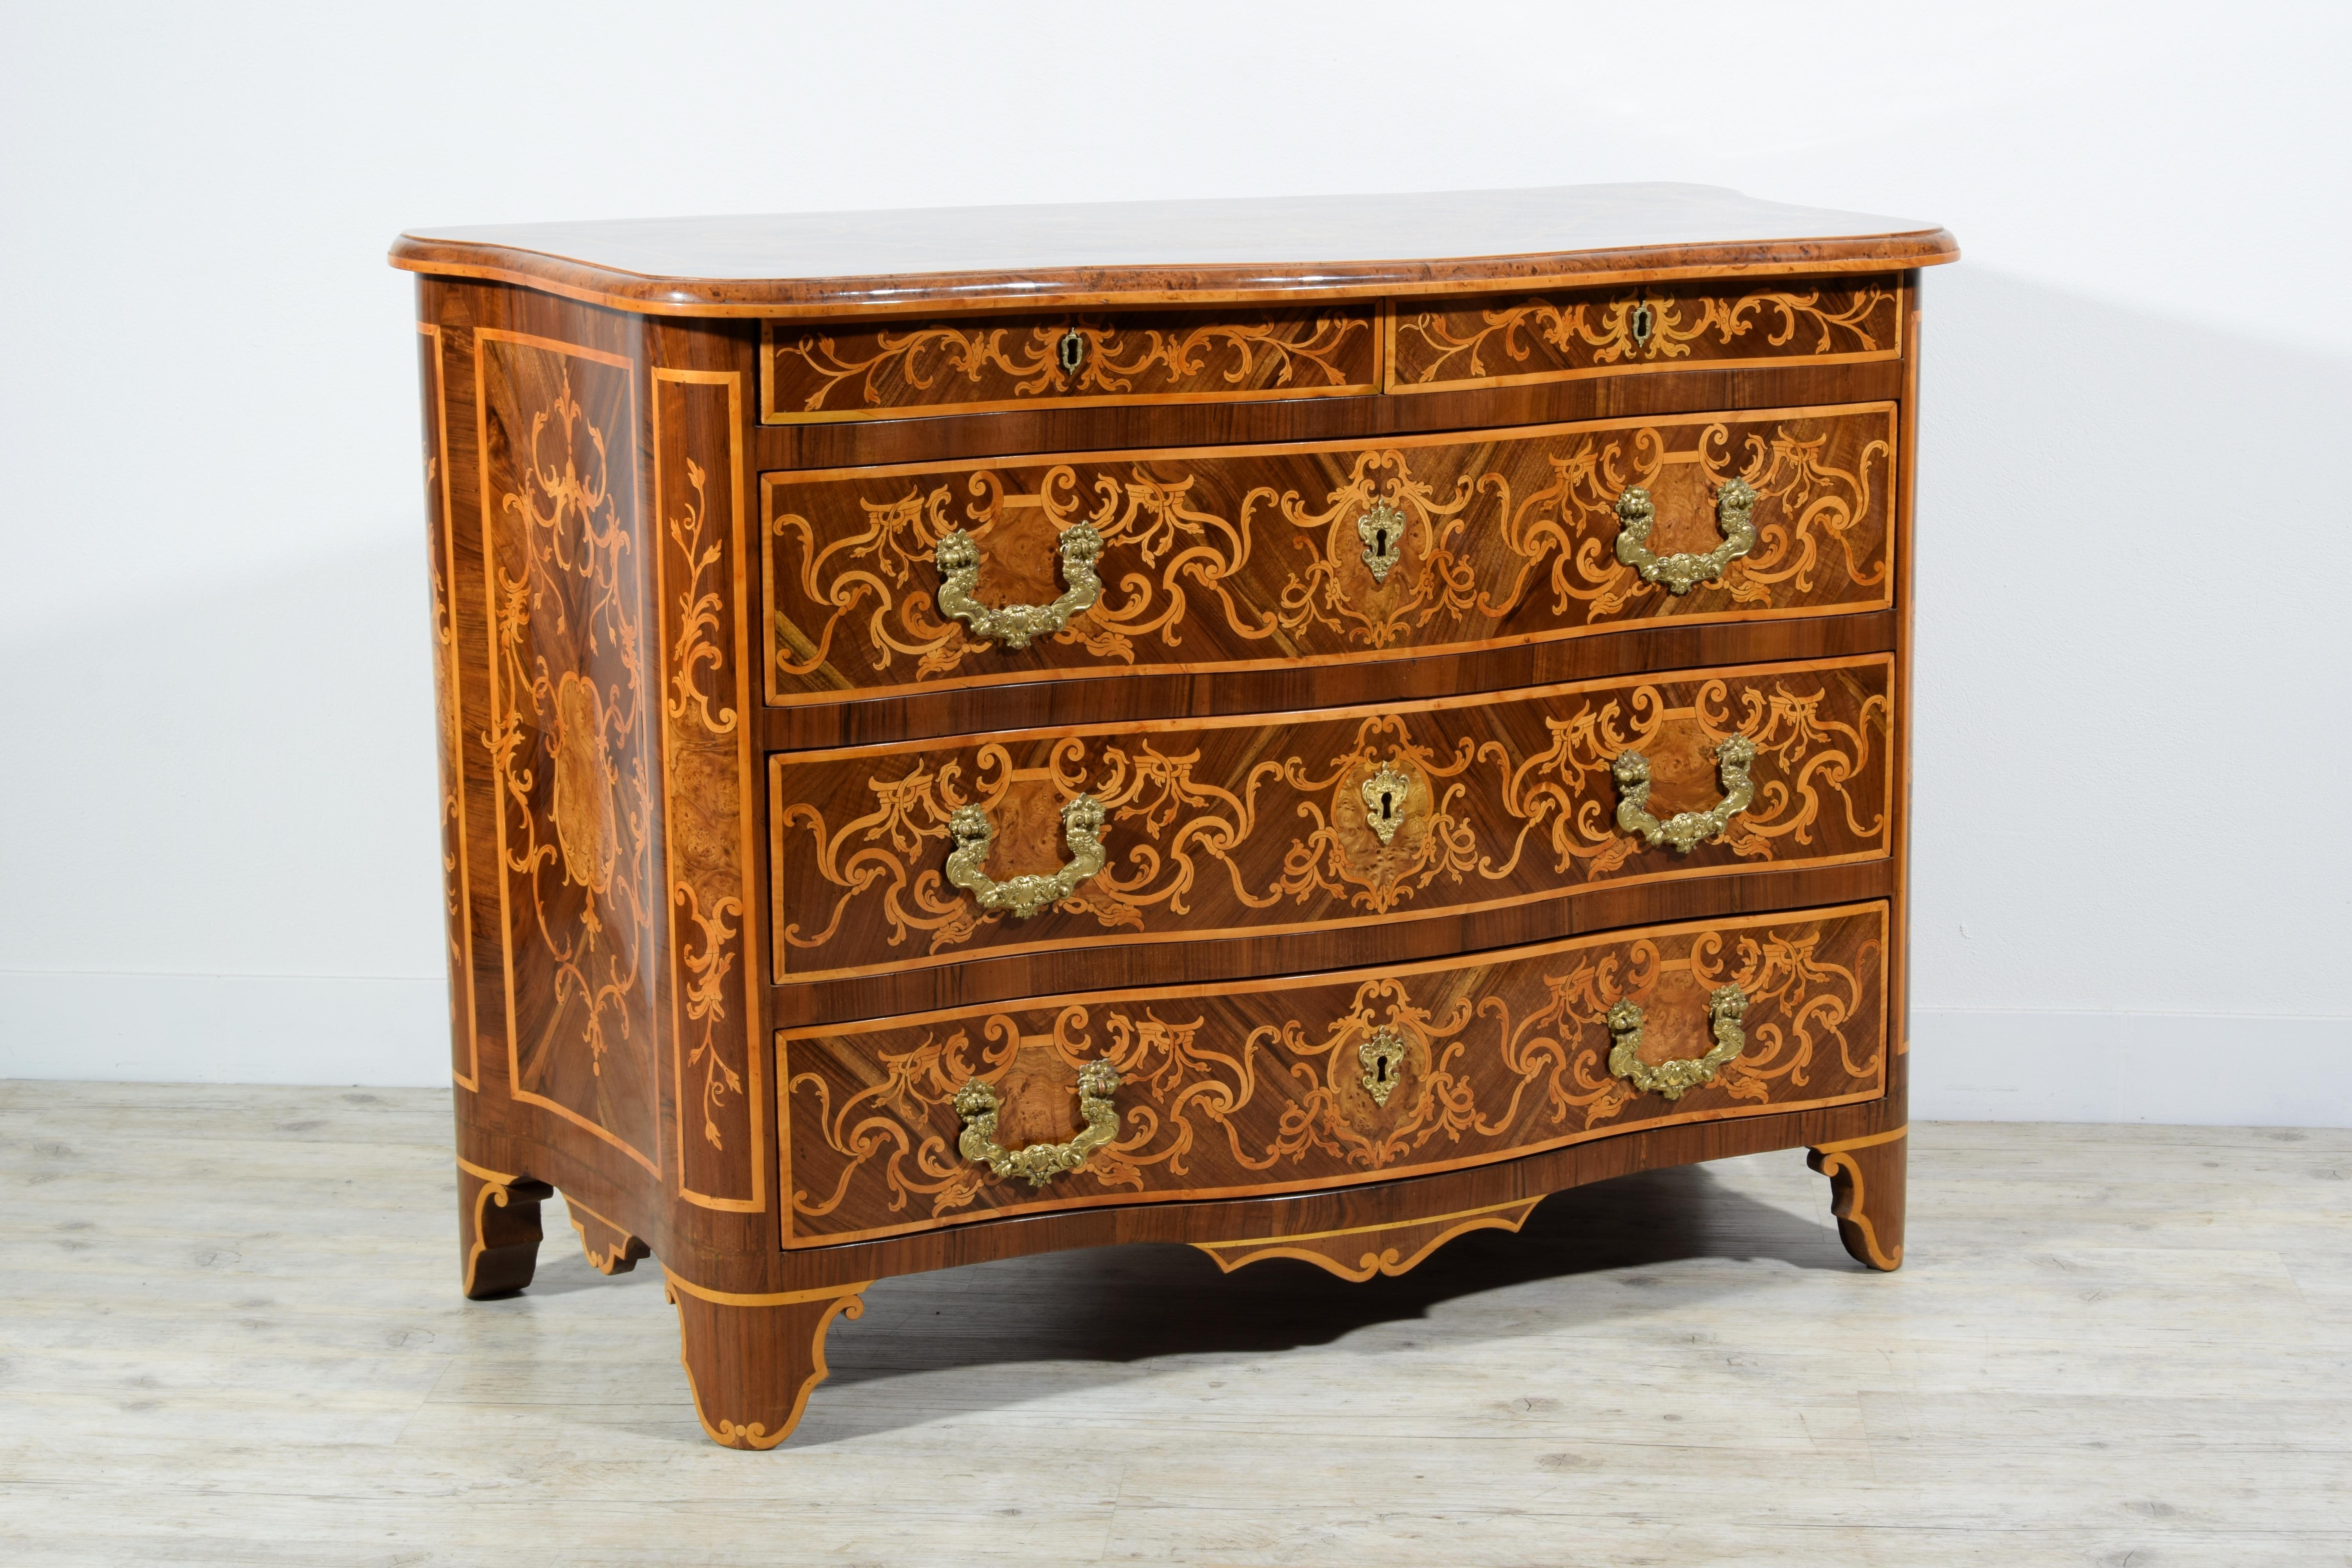 18th Century Italian Paved and Inlaid Wood Chest of Drawers 14